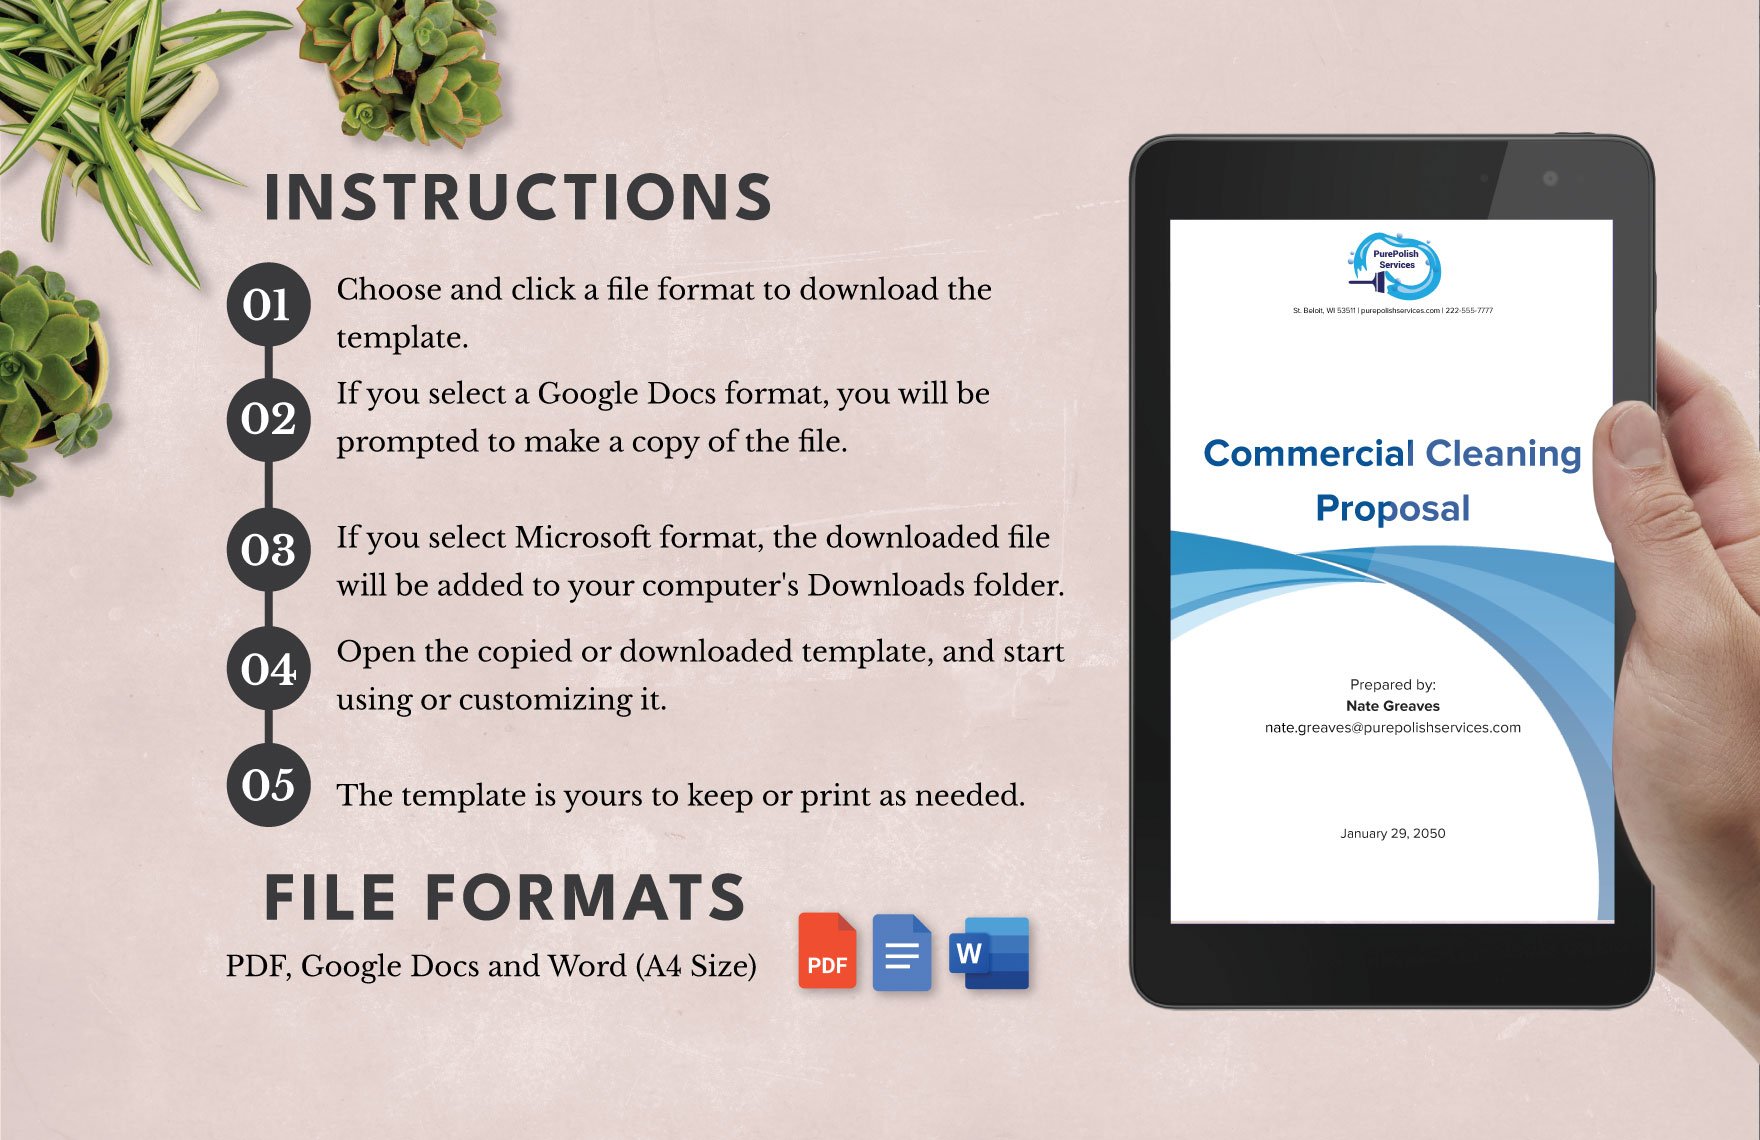 Standard Commercial Cleaning Proposal Template